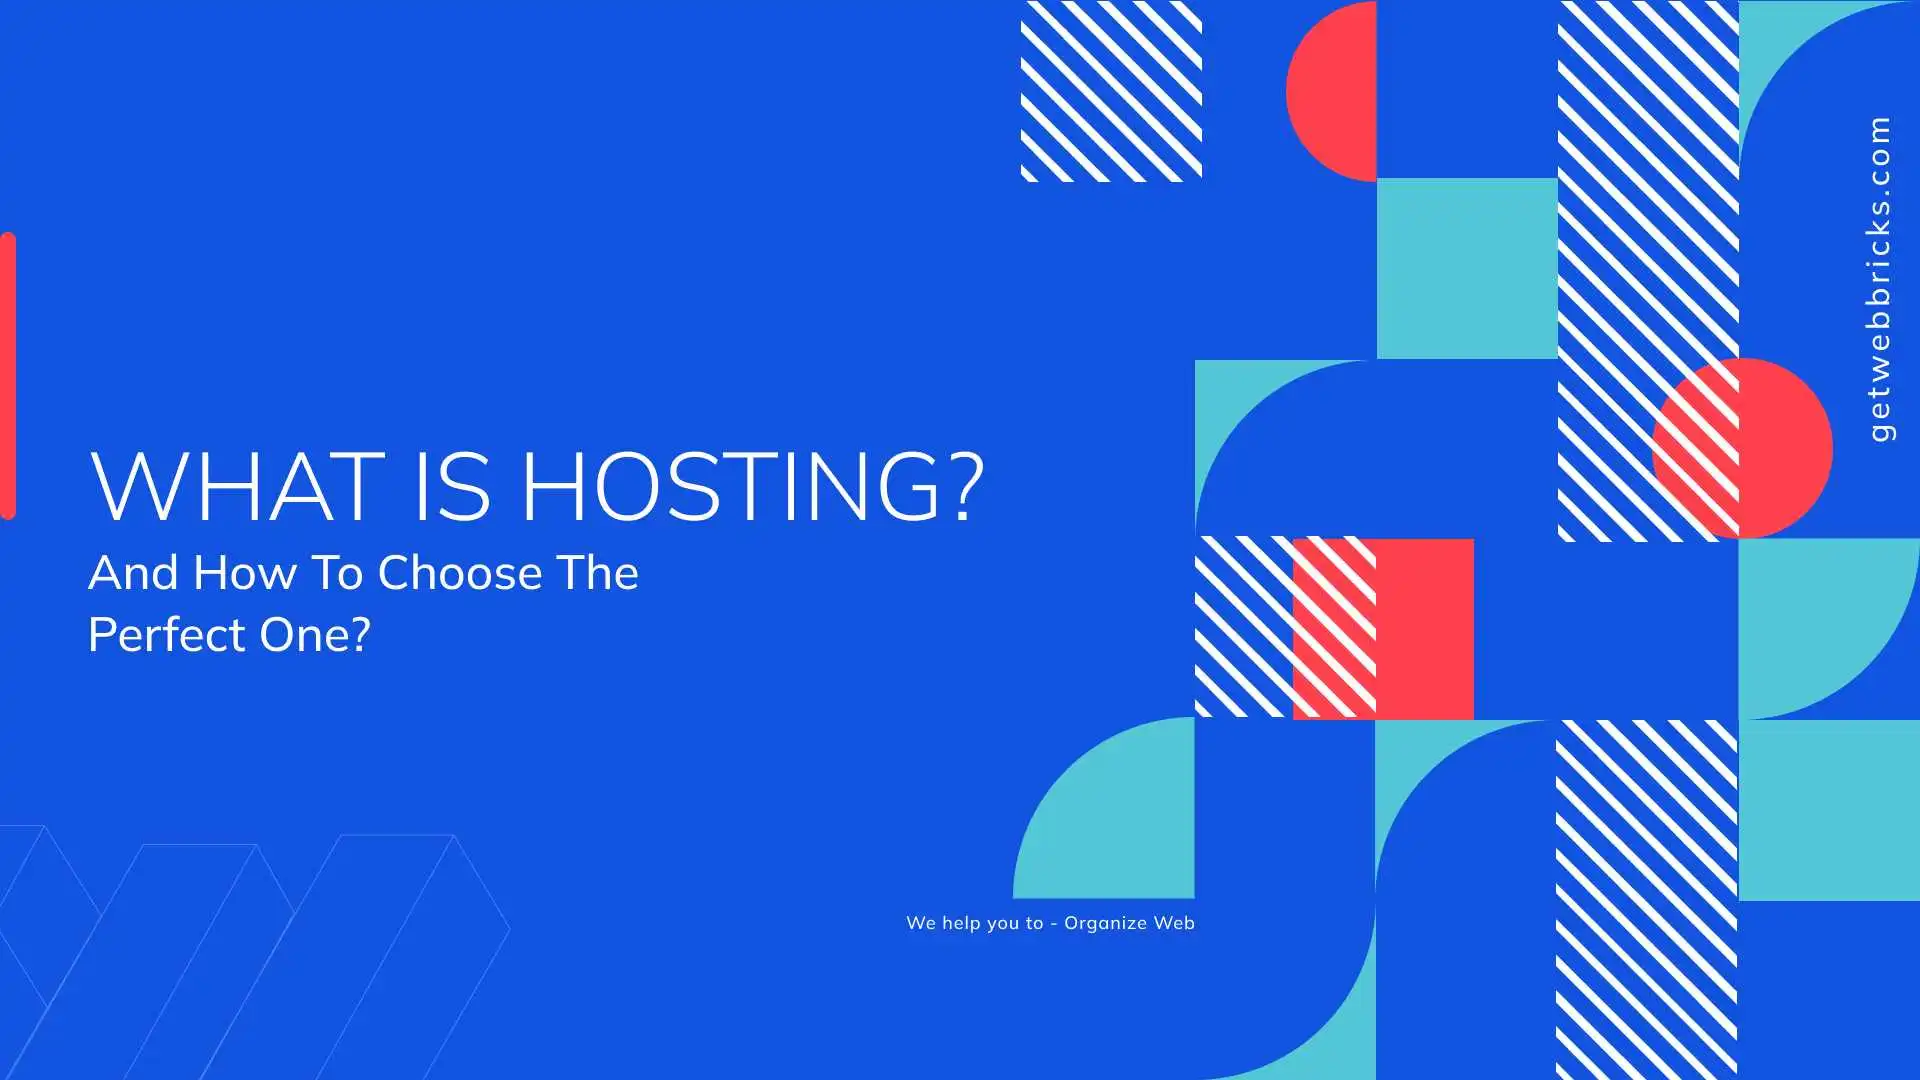 What Is Hosting? And How To Choose The Perfect One?